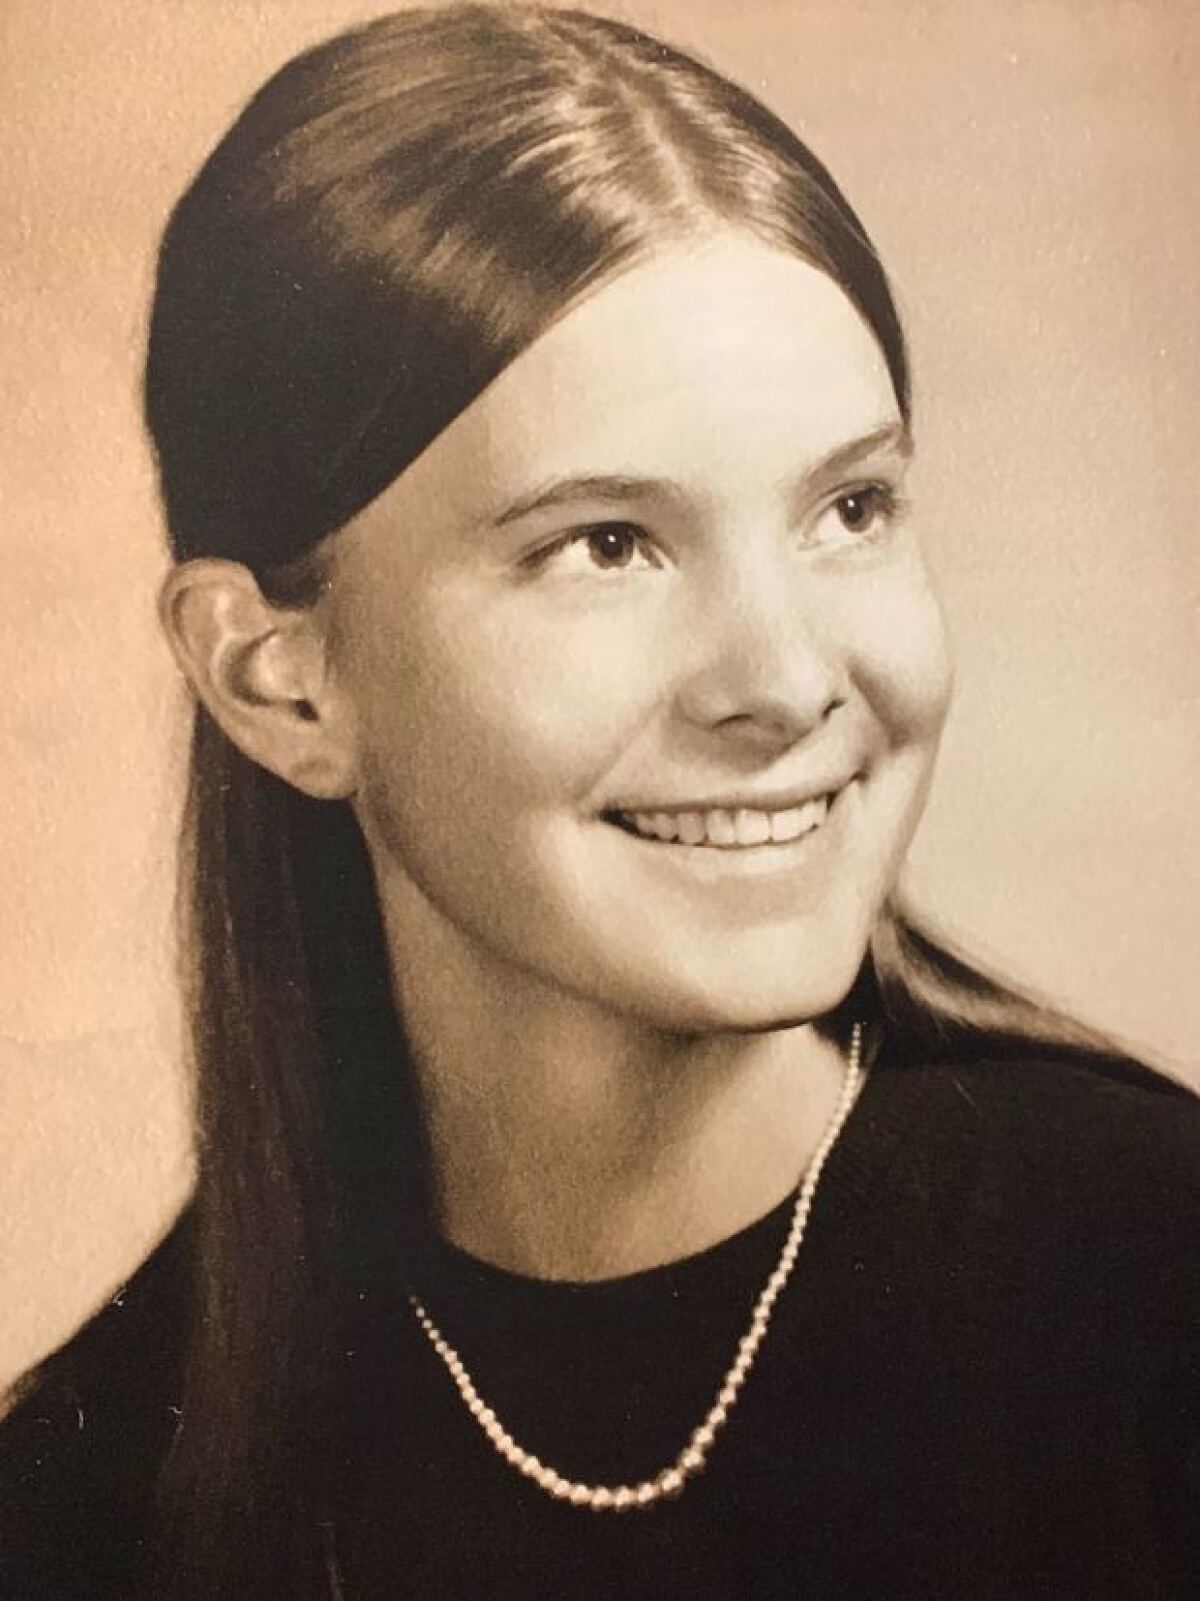 Janet Taylor, 21, went missing near Stanford University on the morning of March 24, 1974, and was found dead in the area of Sand Hill Road.